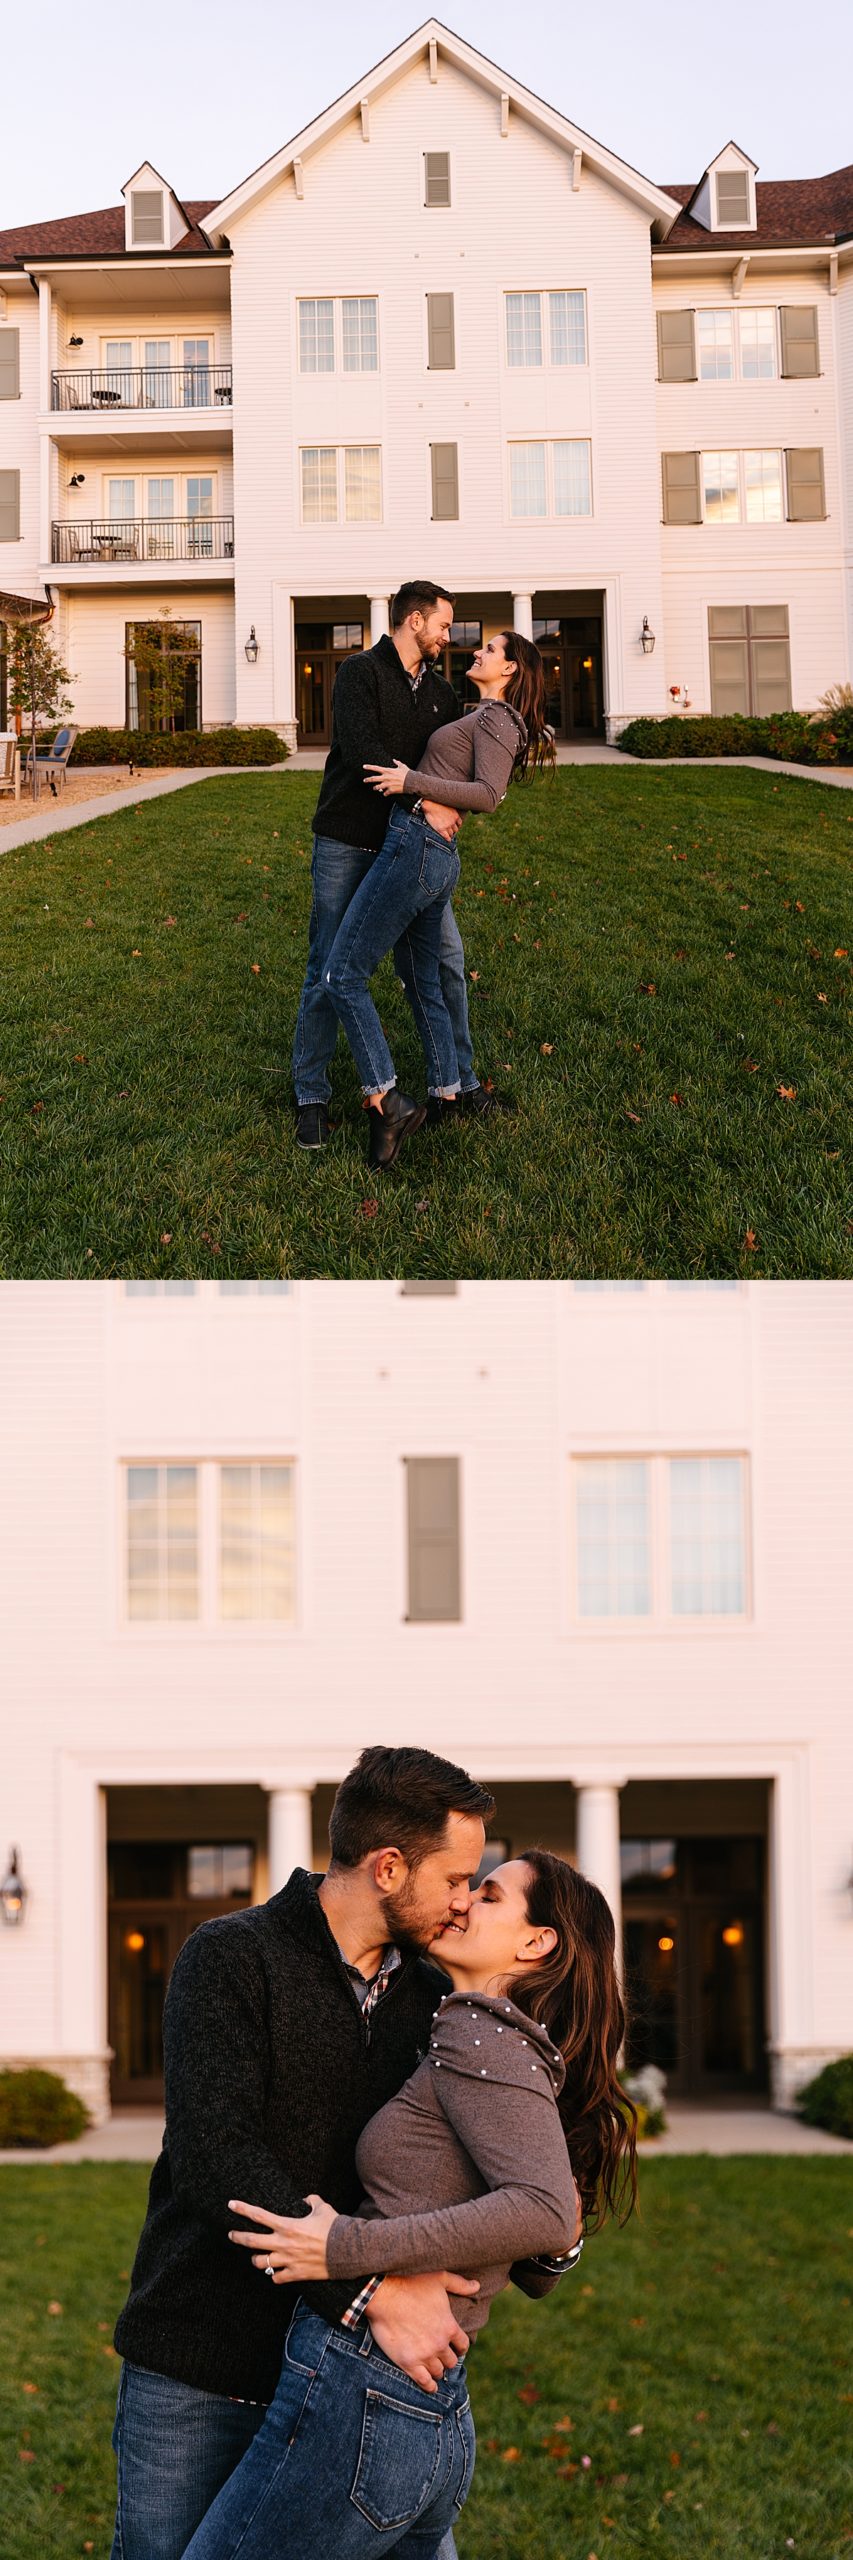 man dipping fiance in front of hotel in kansas by Natalie Nichole photos 